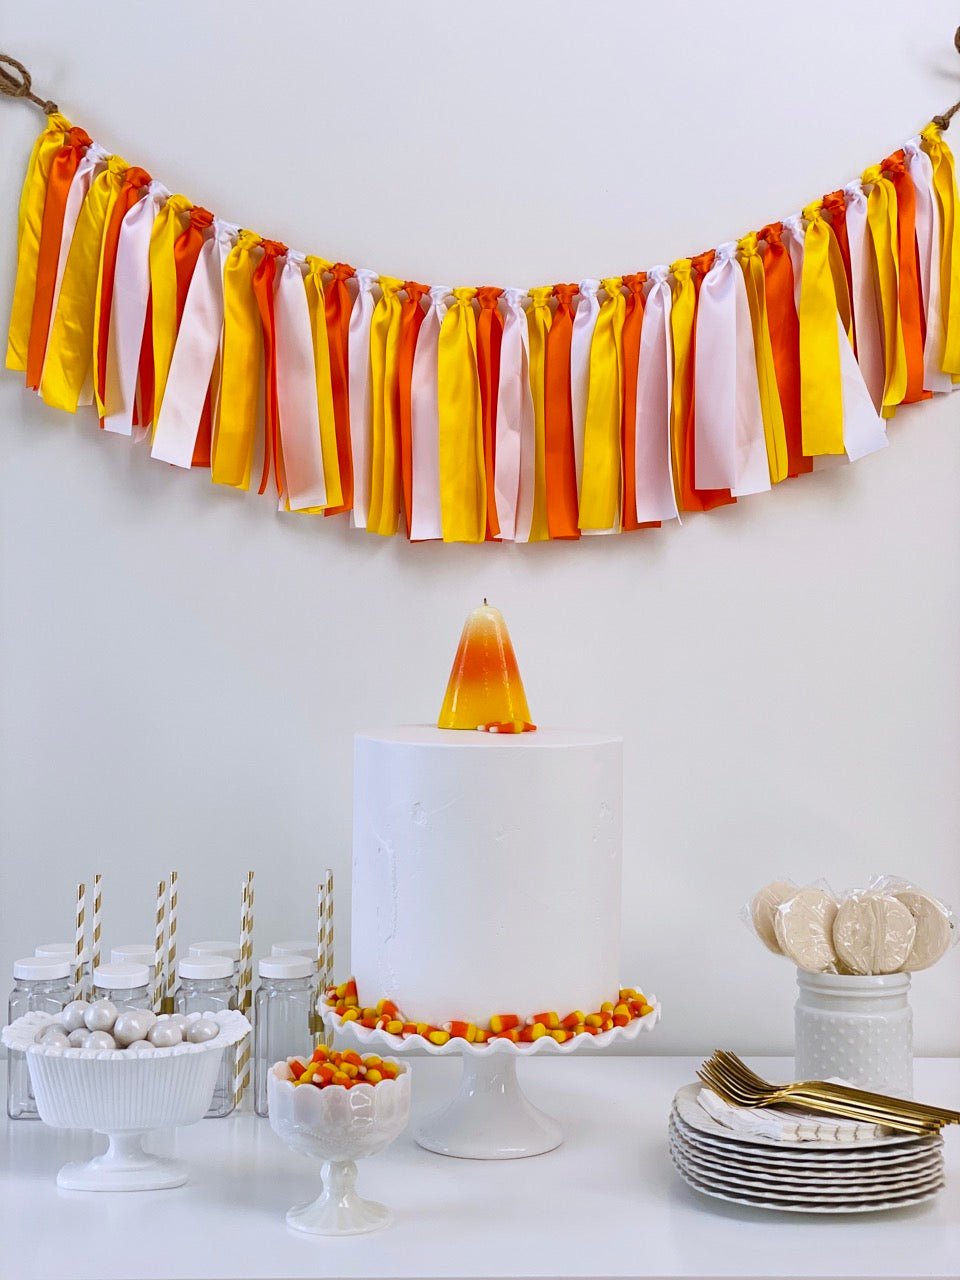 Candy Corn Ribbon Bunting - FREE Shipping - The Party Teacher